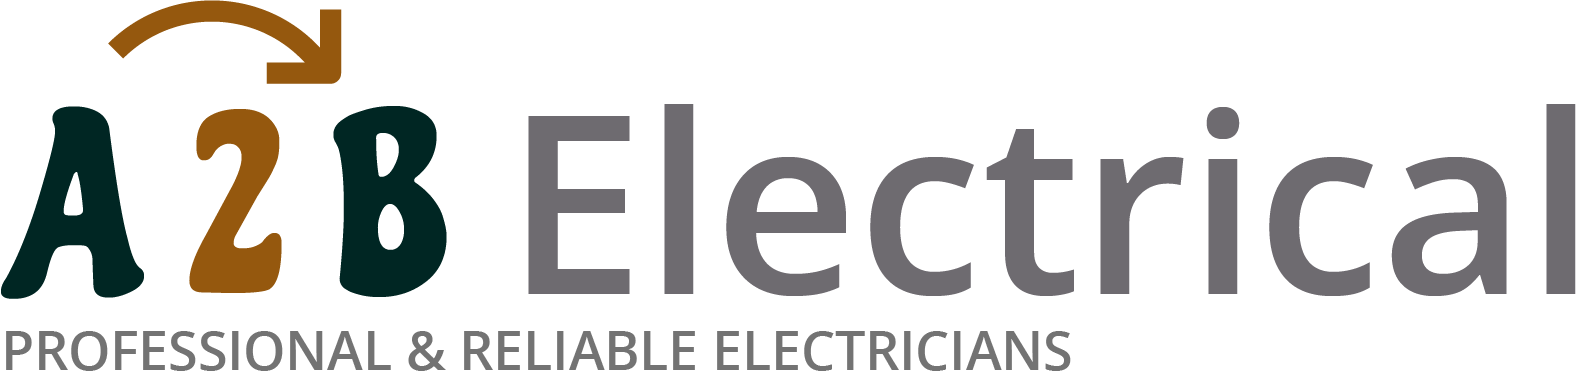 If you have electrical wiring problems in Birkenhead, we can provide an electrician to have a look for you. 